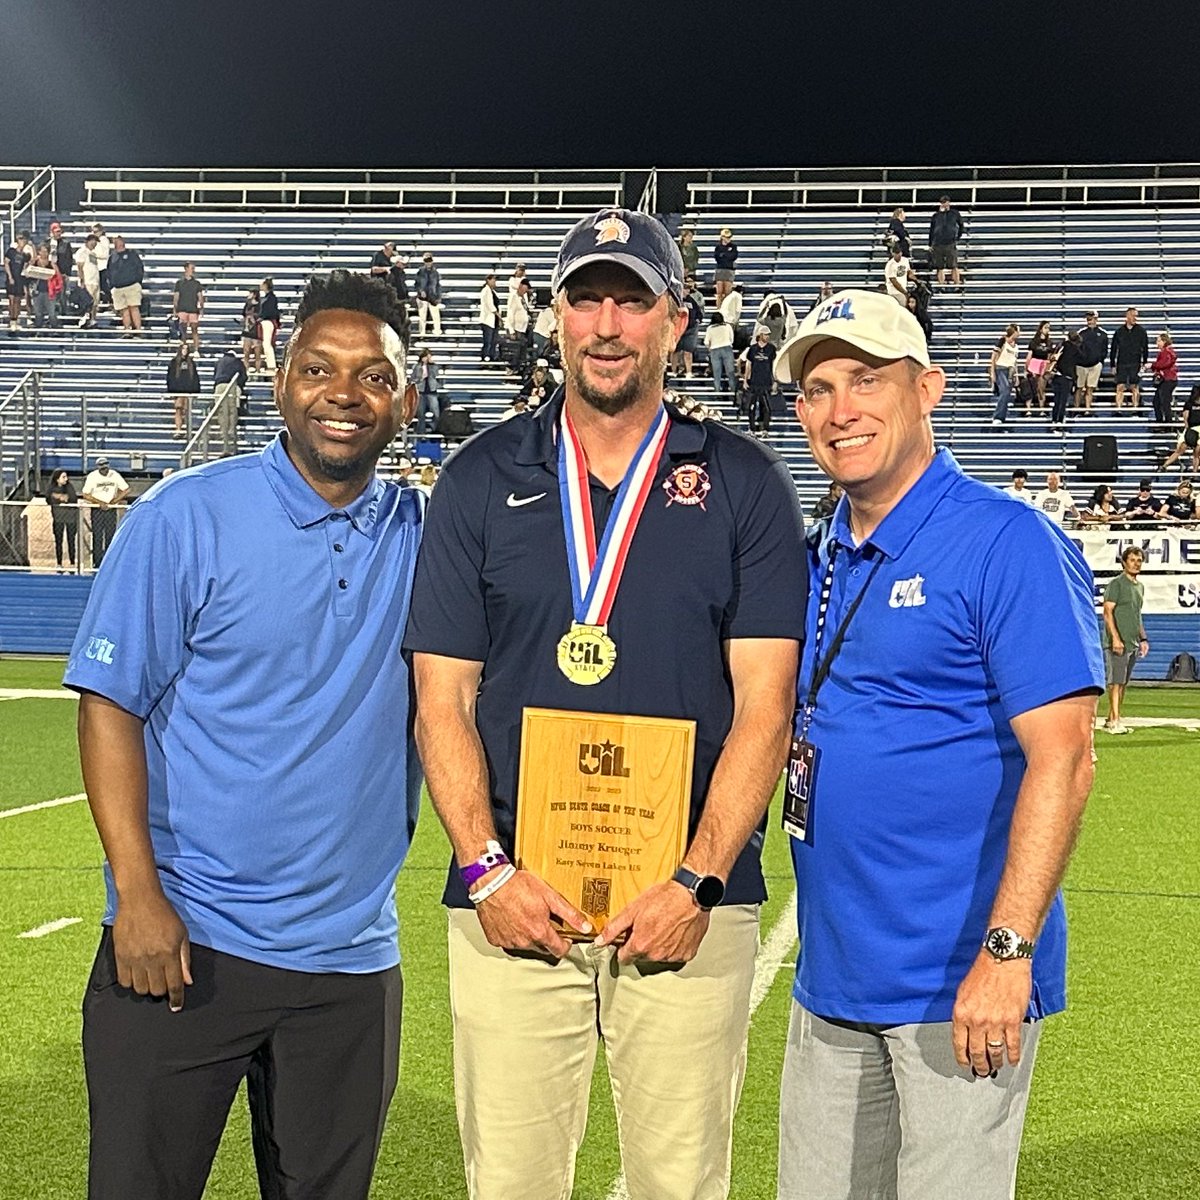 We were proud to present Coach Jimmy Krueger (@SLsoccer) with his award for being named the @NFHS_Org Boys Soccer State Coach of the Year at #UILState on Saturday. Congrats on this well-deserved achievement, Coach!